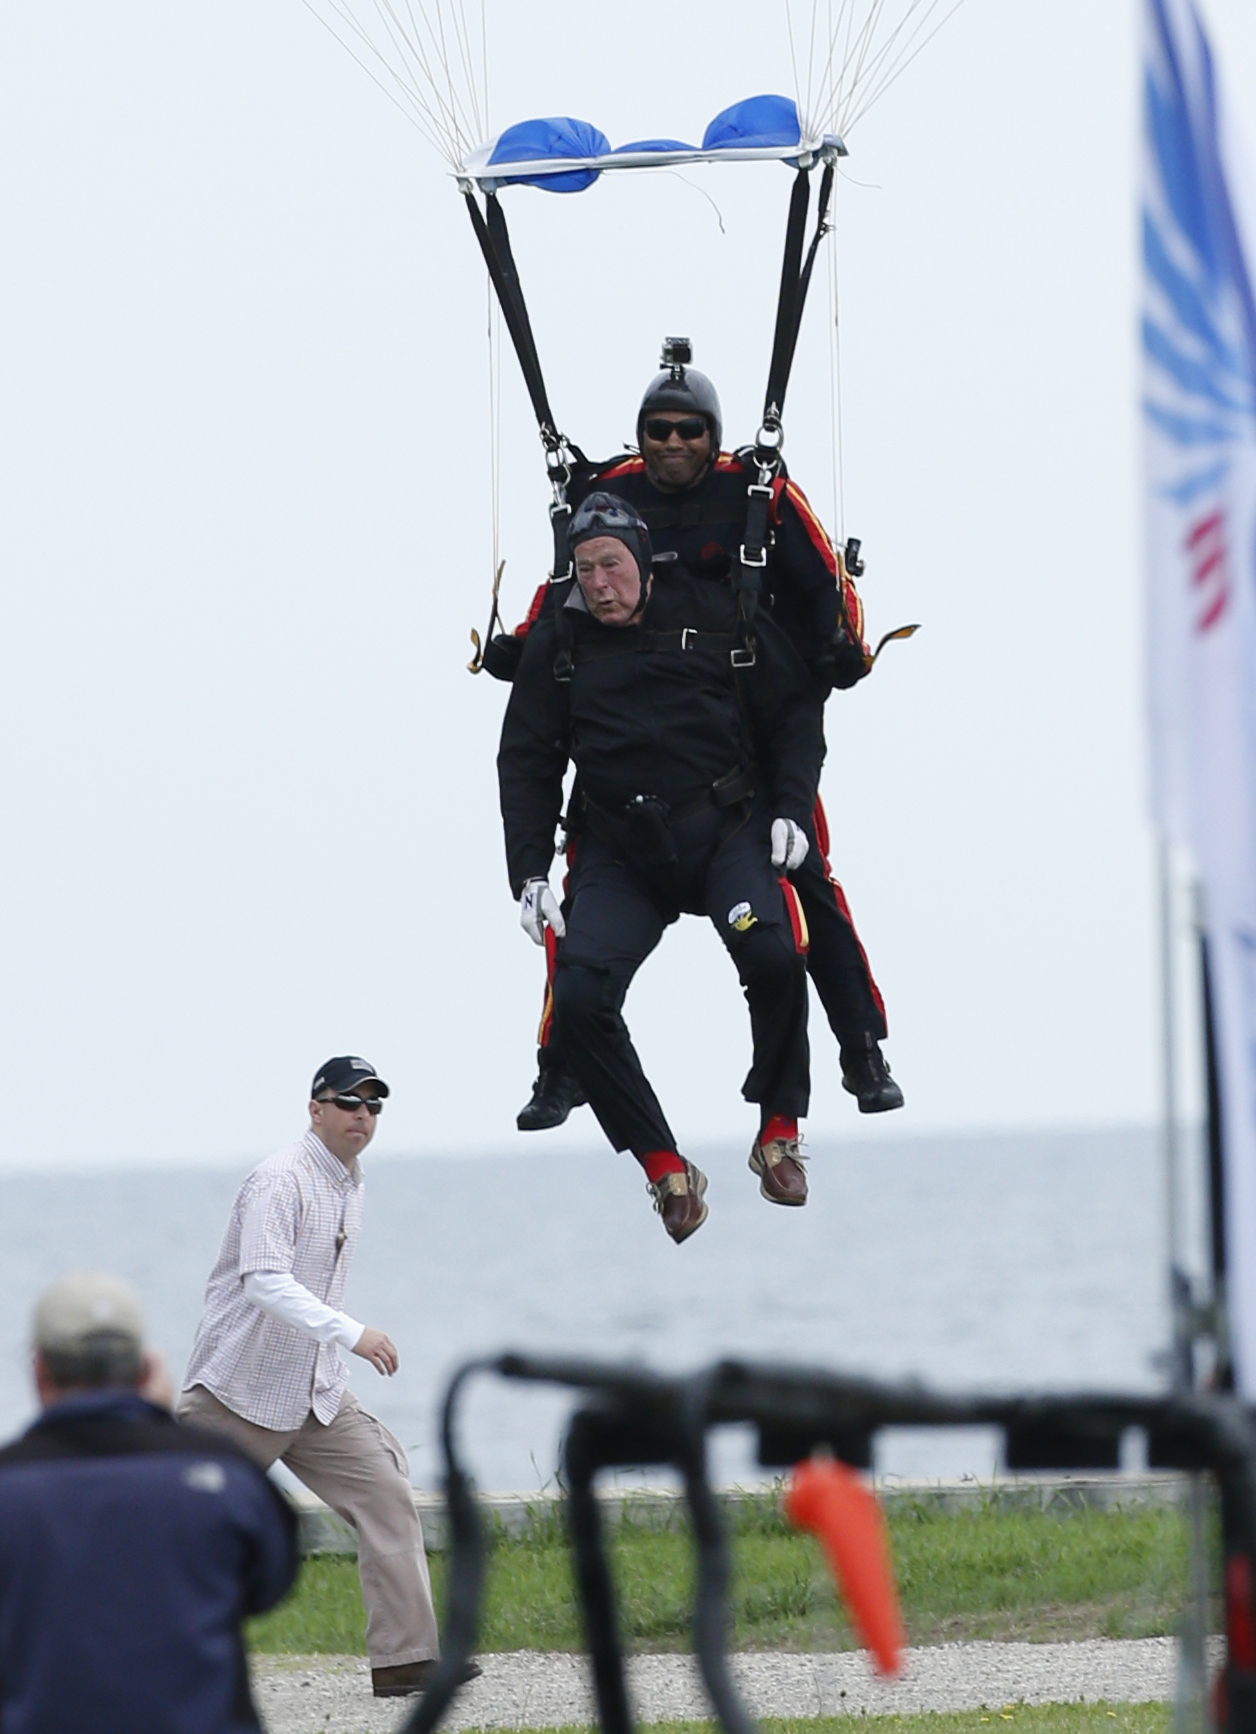 Former President George H.W. Bush, strapped to Sgt. 1st Class Mike Elliott, a retired member of the Army's Golden Knights parachute team, prepare to land on the lawn at St. Anne's Episcopal Church while celebrating Bush's 90th birthday in Kennebunkport, Maine, Thursday, June 12, 2014. Photo: Robert F. Bukaty/Associated Press.